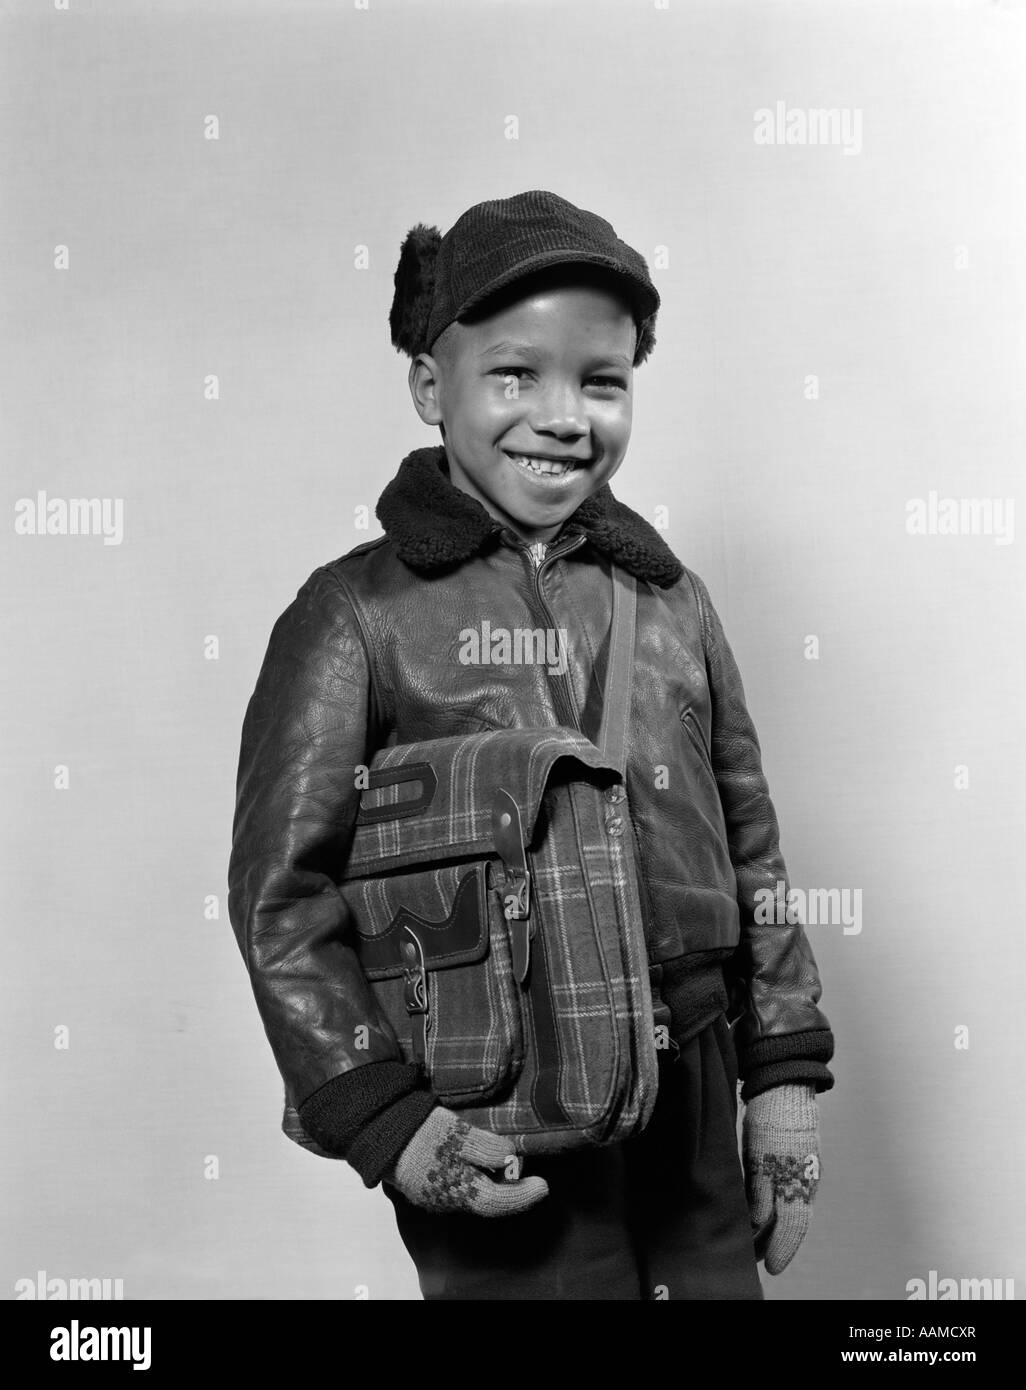 1940s 1950s AFRICAN AMERICAN BOY SMILING WEARING WINTER JACKET GLOVES HOLDING SCHOOL BOOK BAG Stock Photo